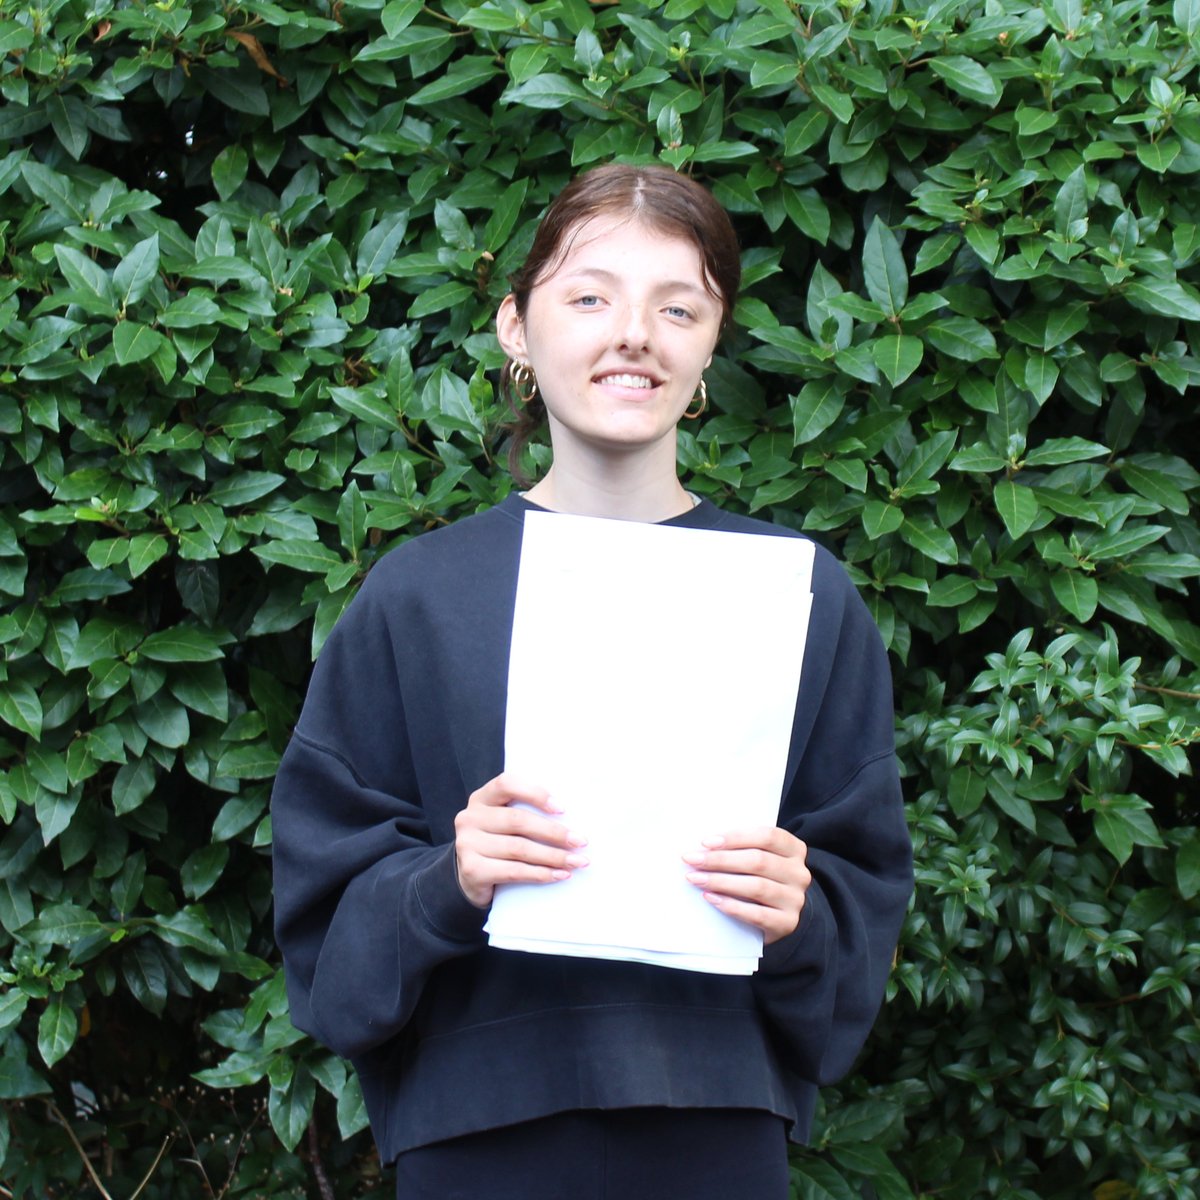 Jess achieved fantastic results of A* A A and B in the EPQ and is now off to read Economics and Industrial Organisation at the @uniofwarwick. Congrats, Jess!